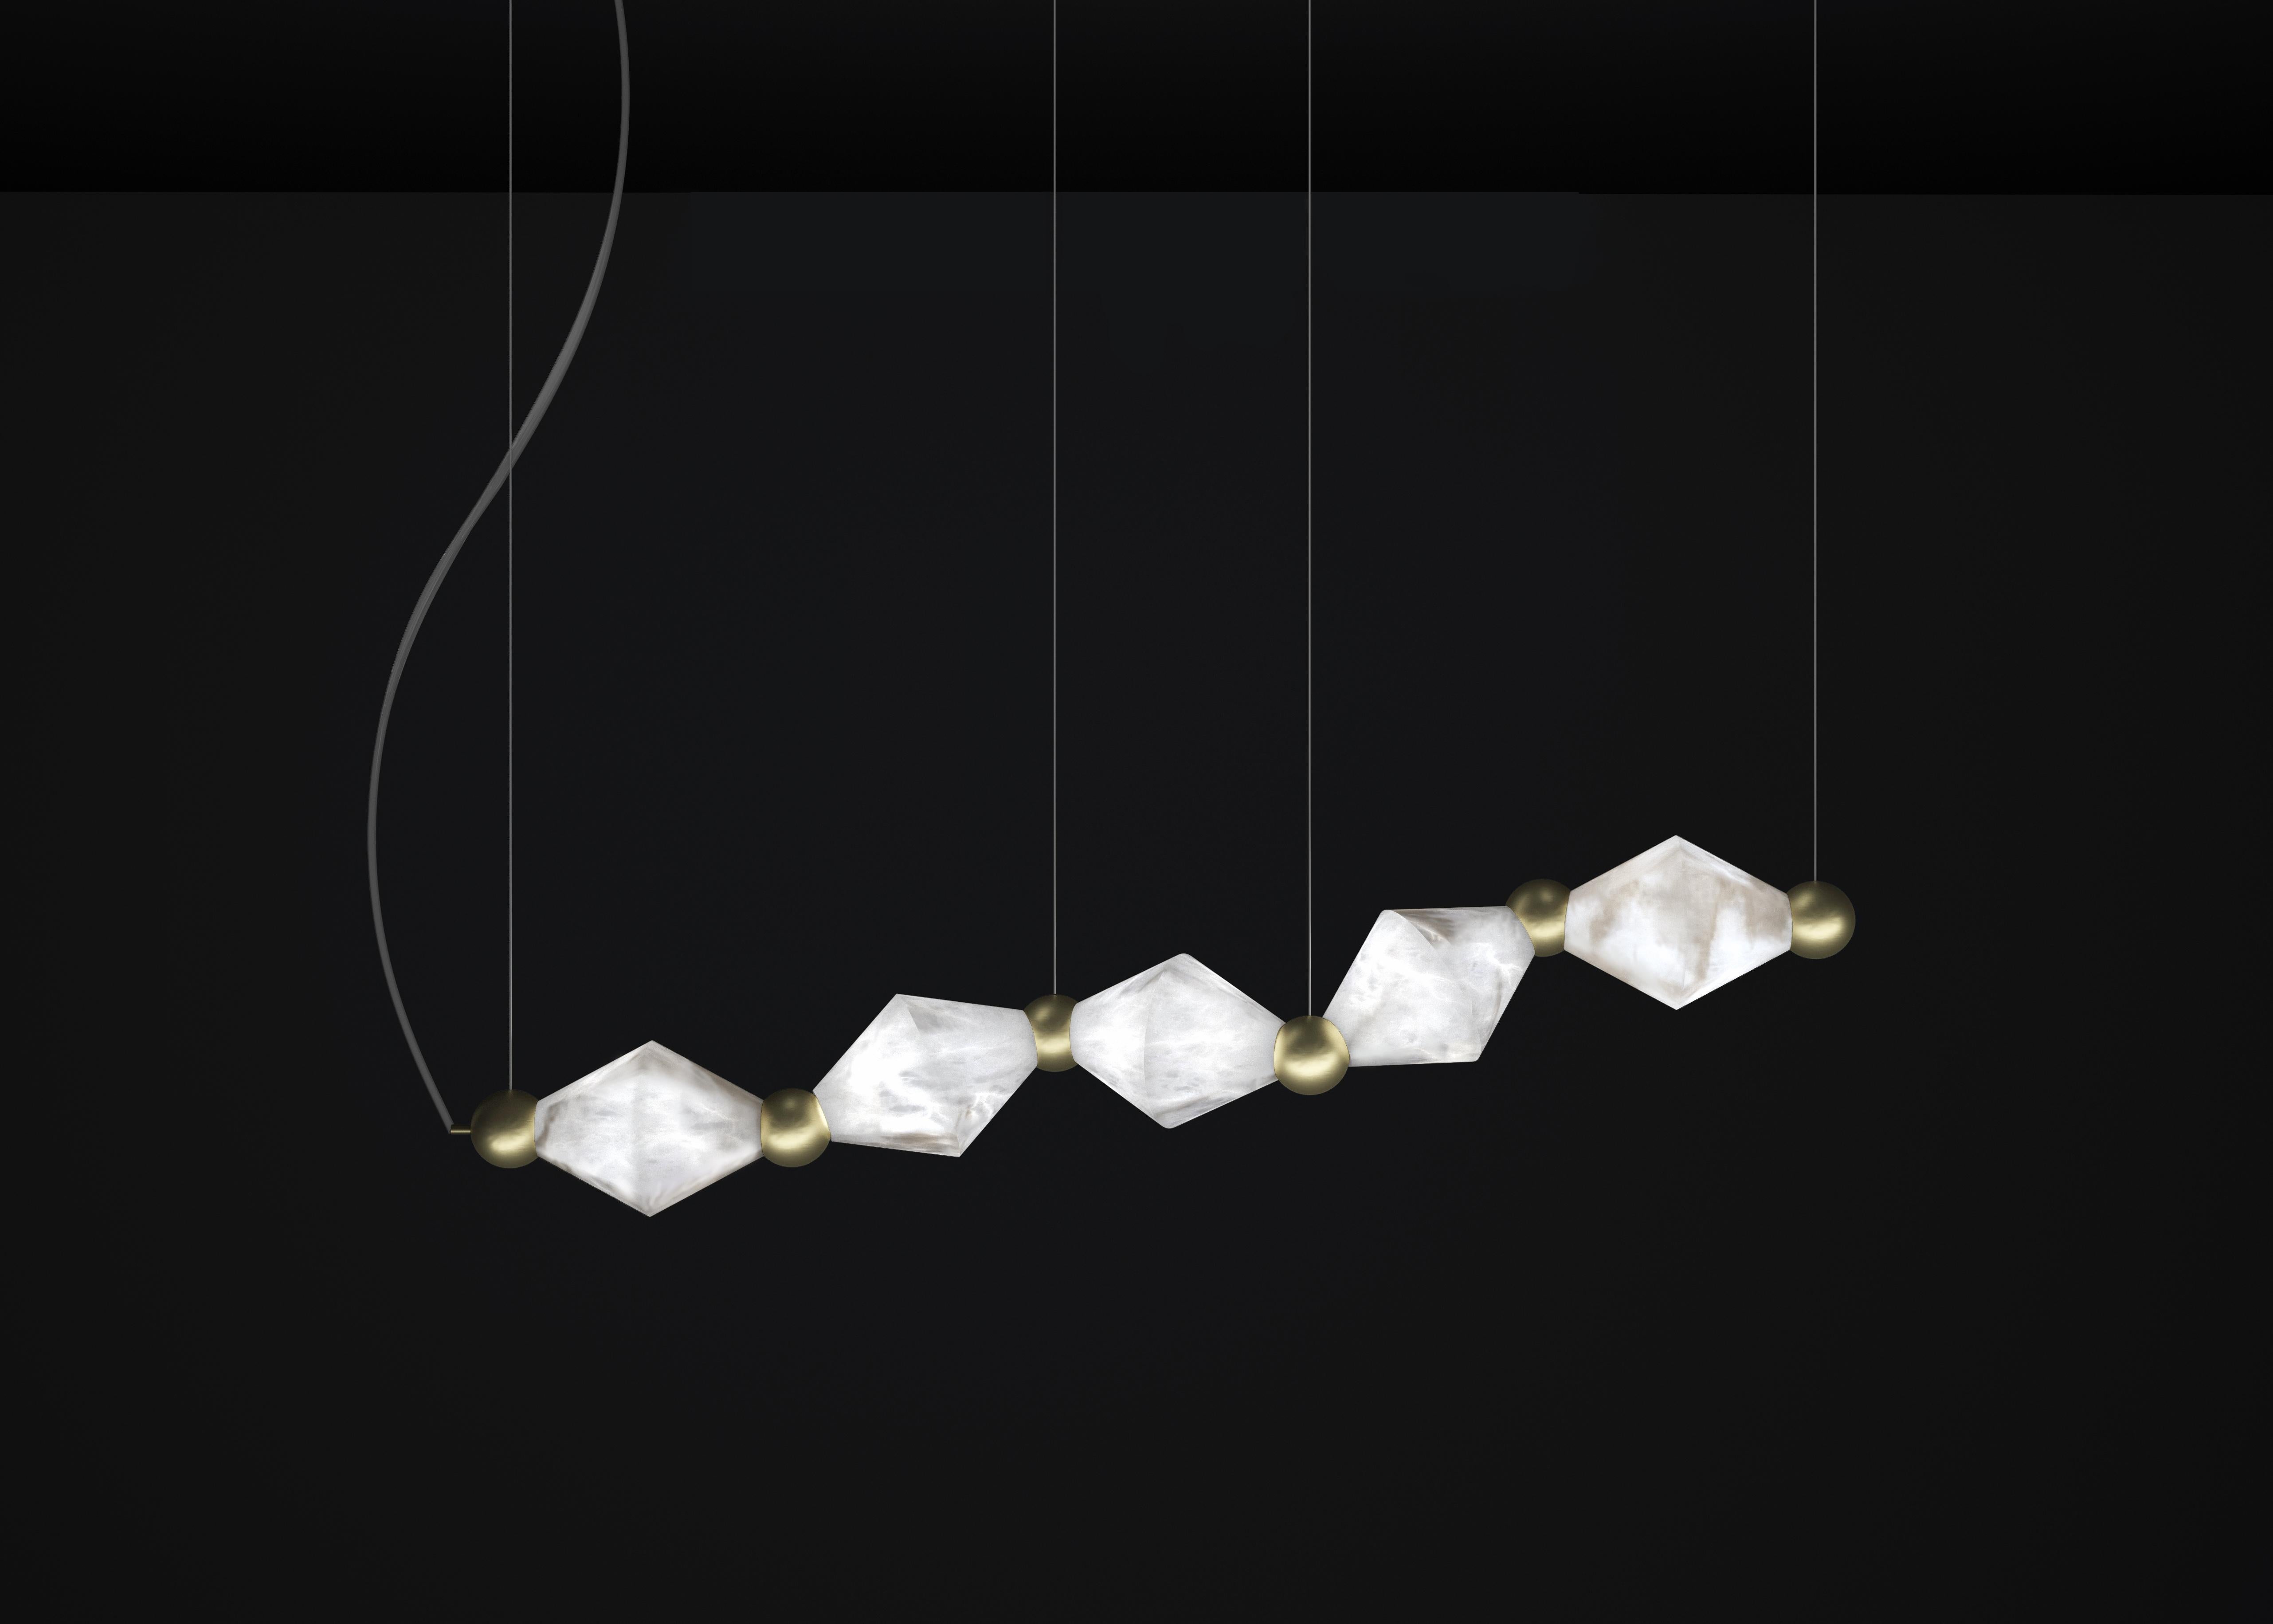 Chronos Brushed Brass Metal Pendant Lamp by Alabastro Italiano
Dimensions: D 21 x W 142 x H 31 cm.
Materials: White alabaster and brass.

Available in different finishes: Shiny Silver, Bronze, Brushed Brass, Ruggine of Florence, Brushed Burnished,